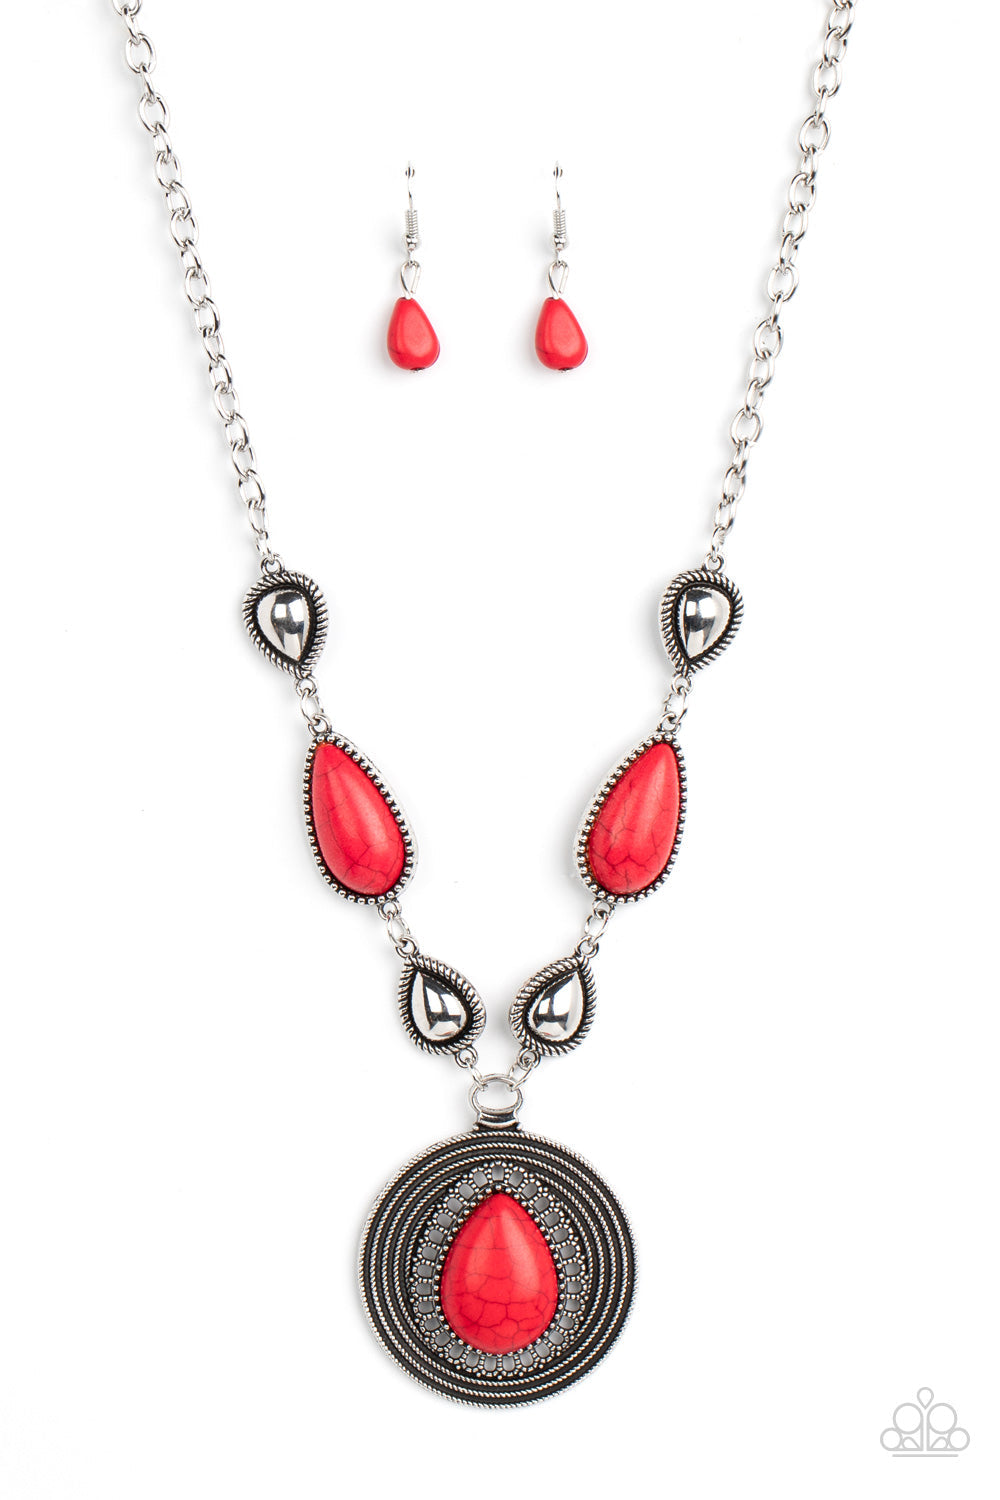 Saguaro Soul Trek - Red Stone and Silver Necklace - Paparazzi Jewelry - shiny silver teardrops alternate with red stone frames at the bottom of a silver chain. Bordered in whirls of studded details, an oversized red teardrop stone is pressed into the center of the rippling silver pendant for a hypnotic finish. Features an adjustable clasp closure. 